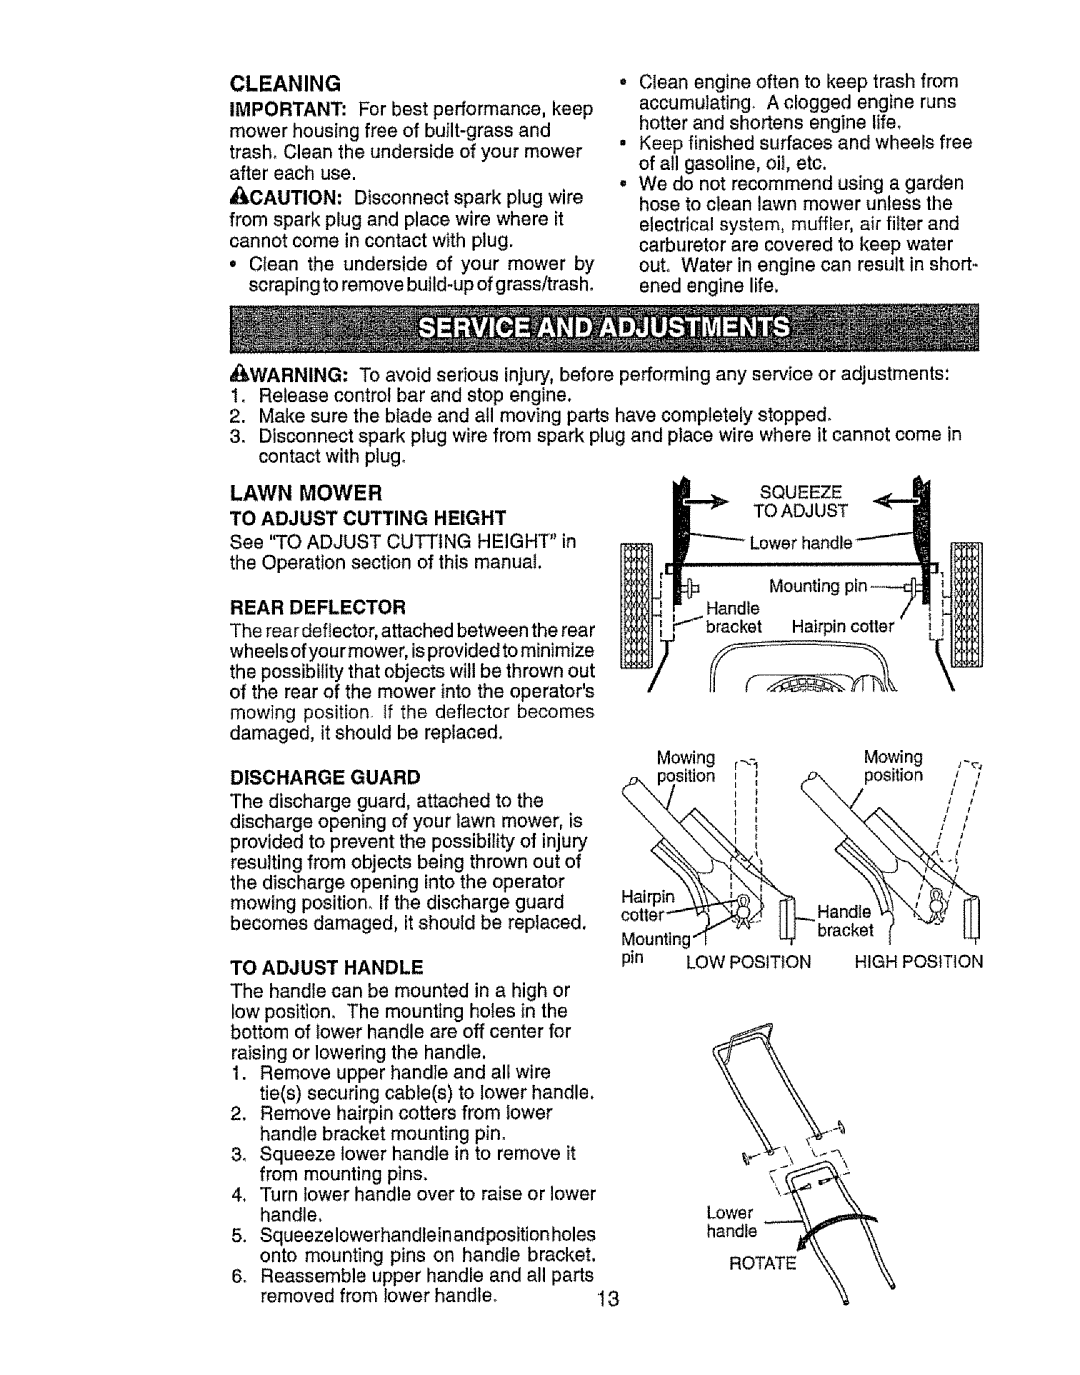 Craftsman 917.385125 Cleaning, Lawn Mower, To Adjust Cutting, Height, Rear Deflector, Discharge Guard, To Adjust Handle 